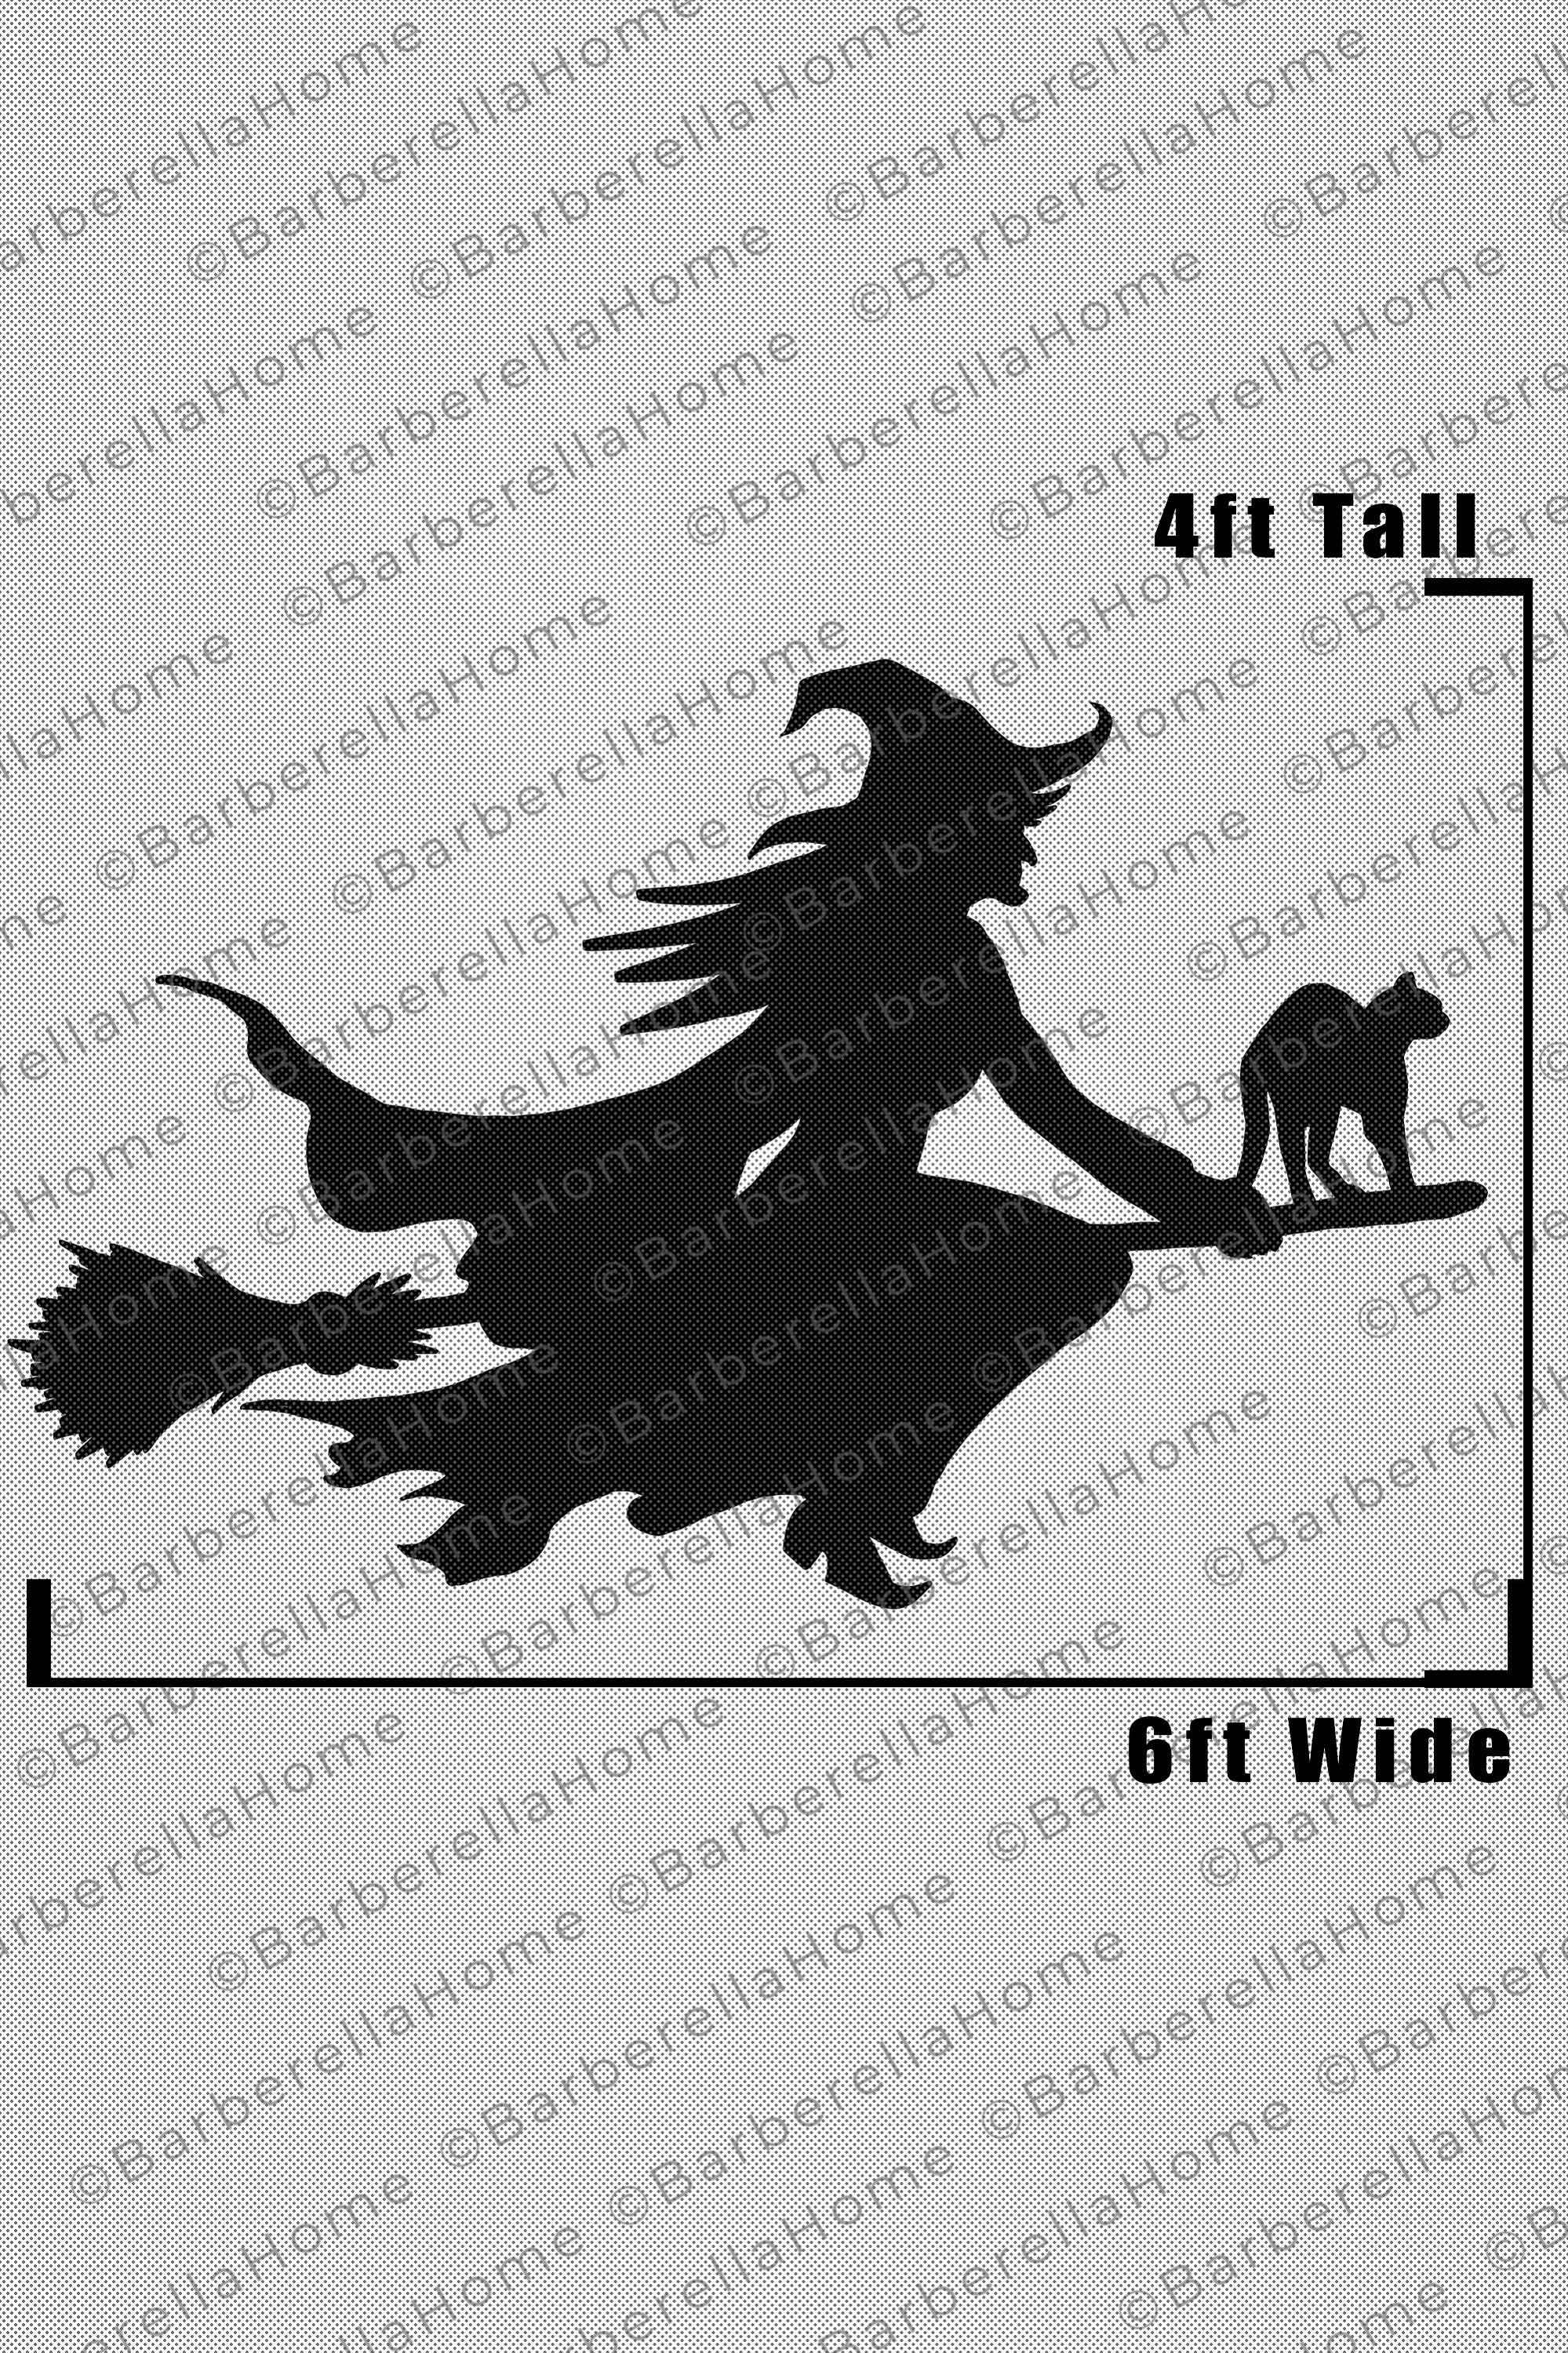 Halloween Acrylic Router Templates 3 pc Set - Witch, Bat, Ghost | MLCS